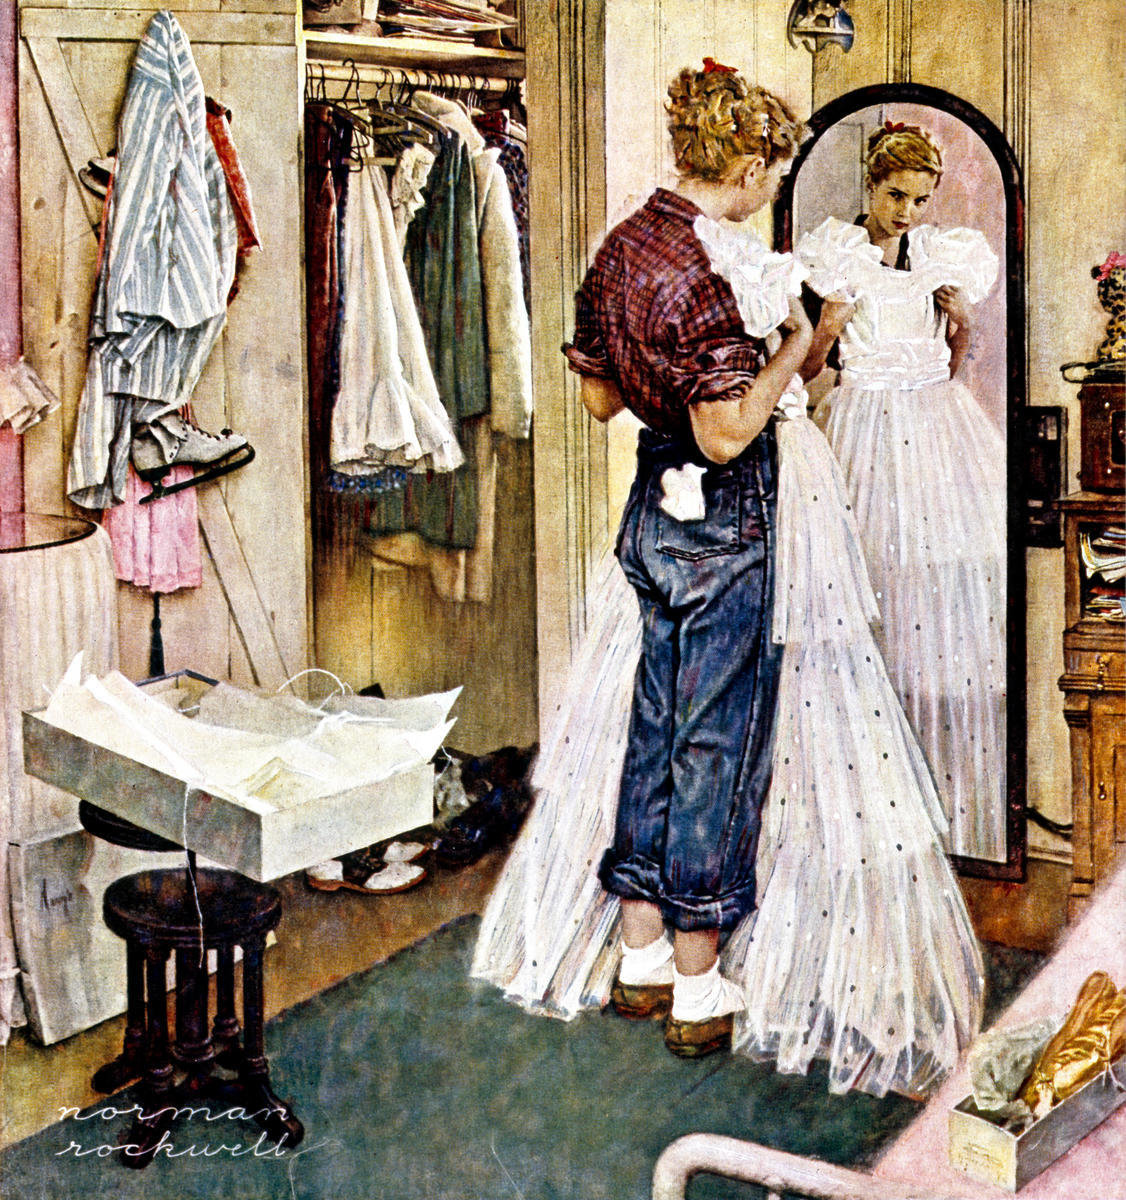 Norman Rockwell, Prom Dress, cover illustration for the Saturday Evening Post, March 19, 1949; with Cathy Burow as a model.